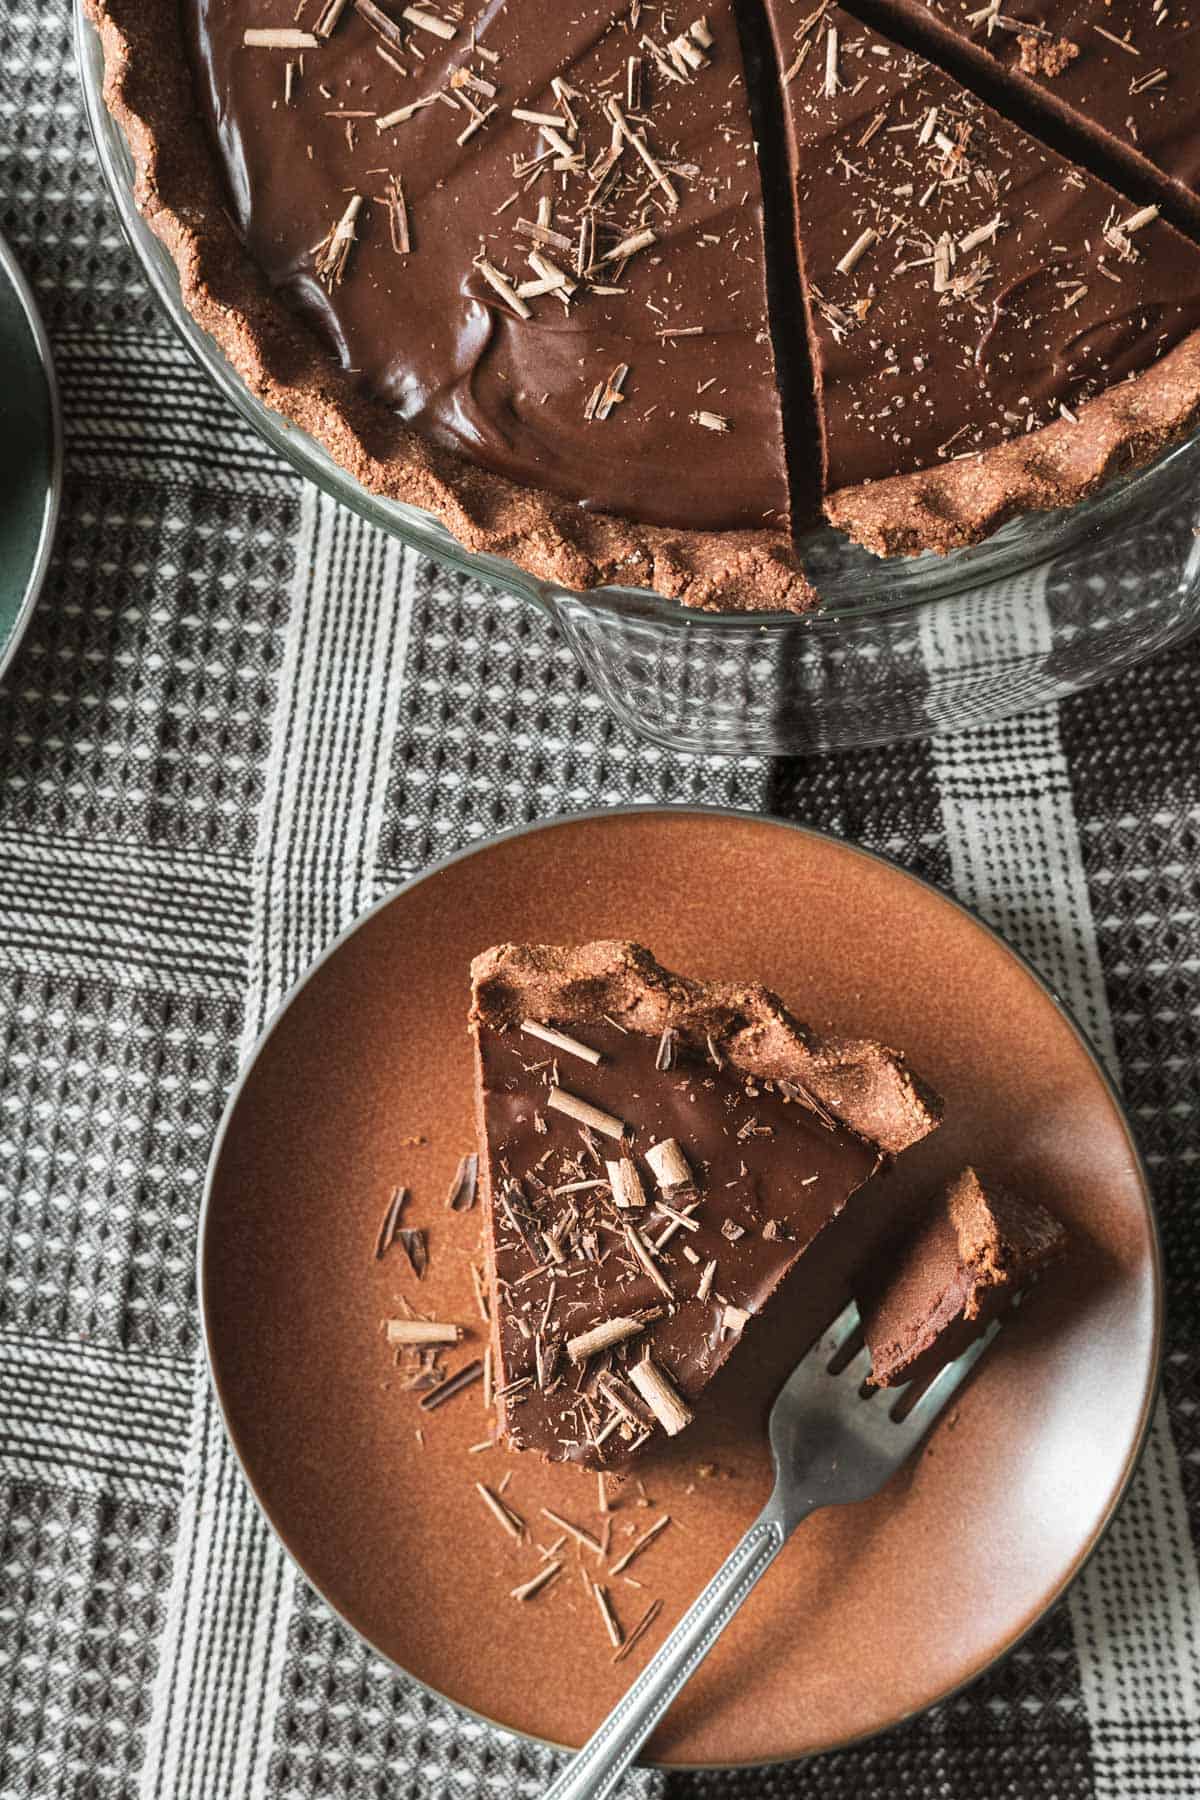 rich and dark chocolate pie on a rust colored plate with the whole pie in background.